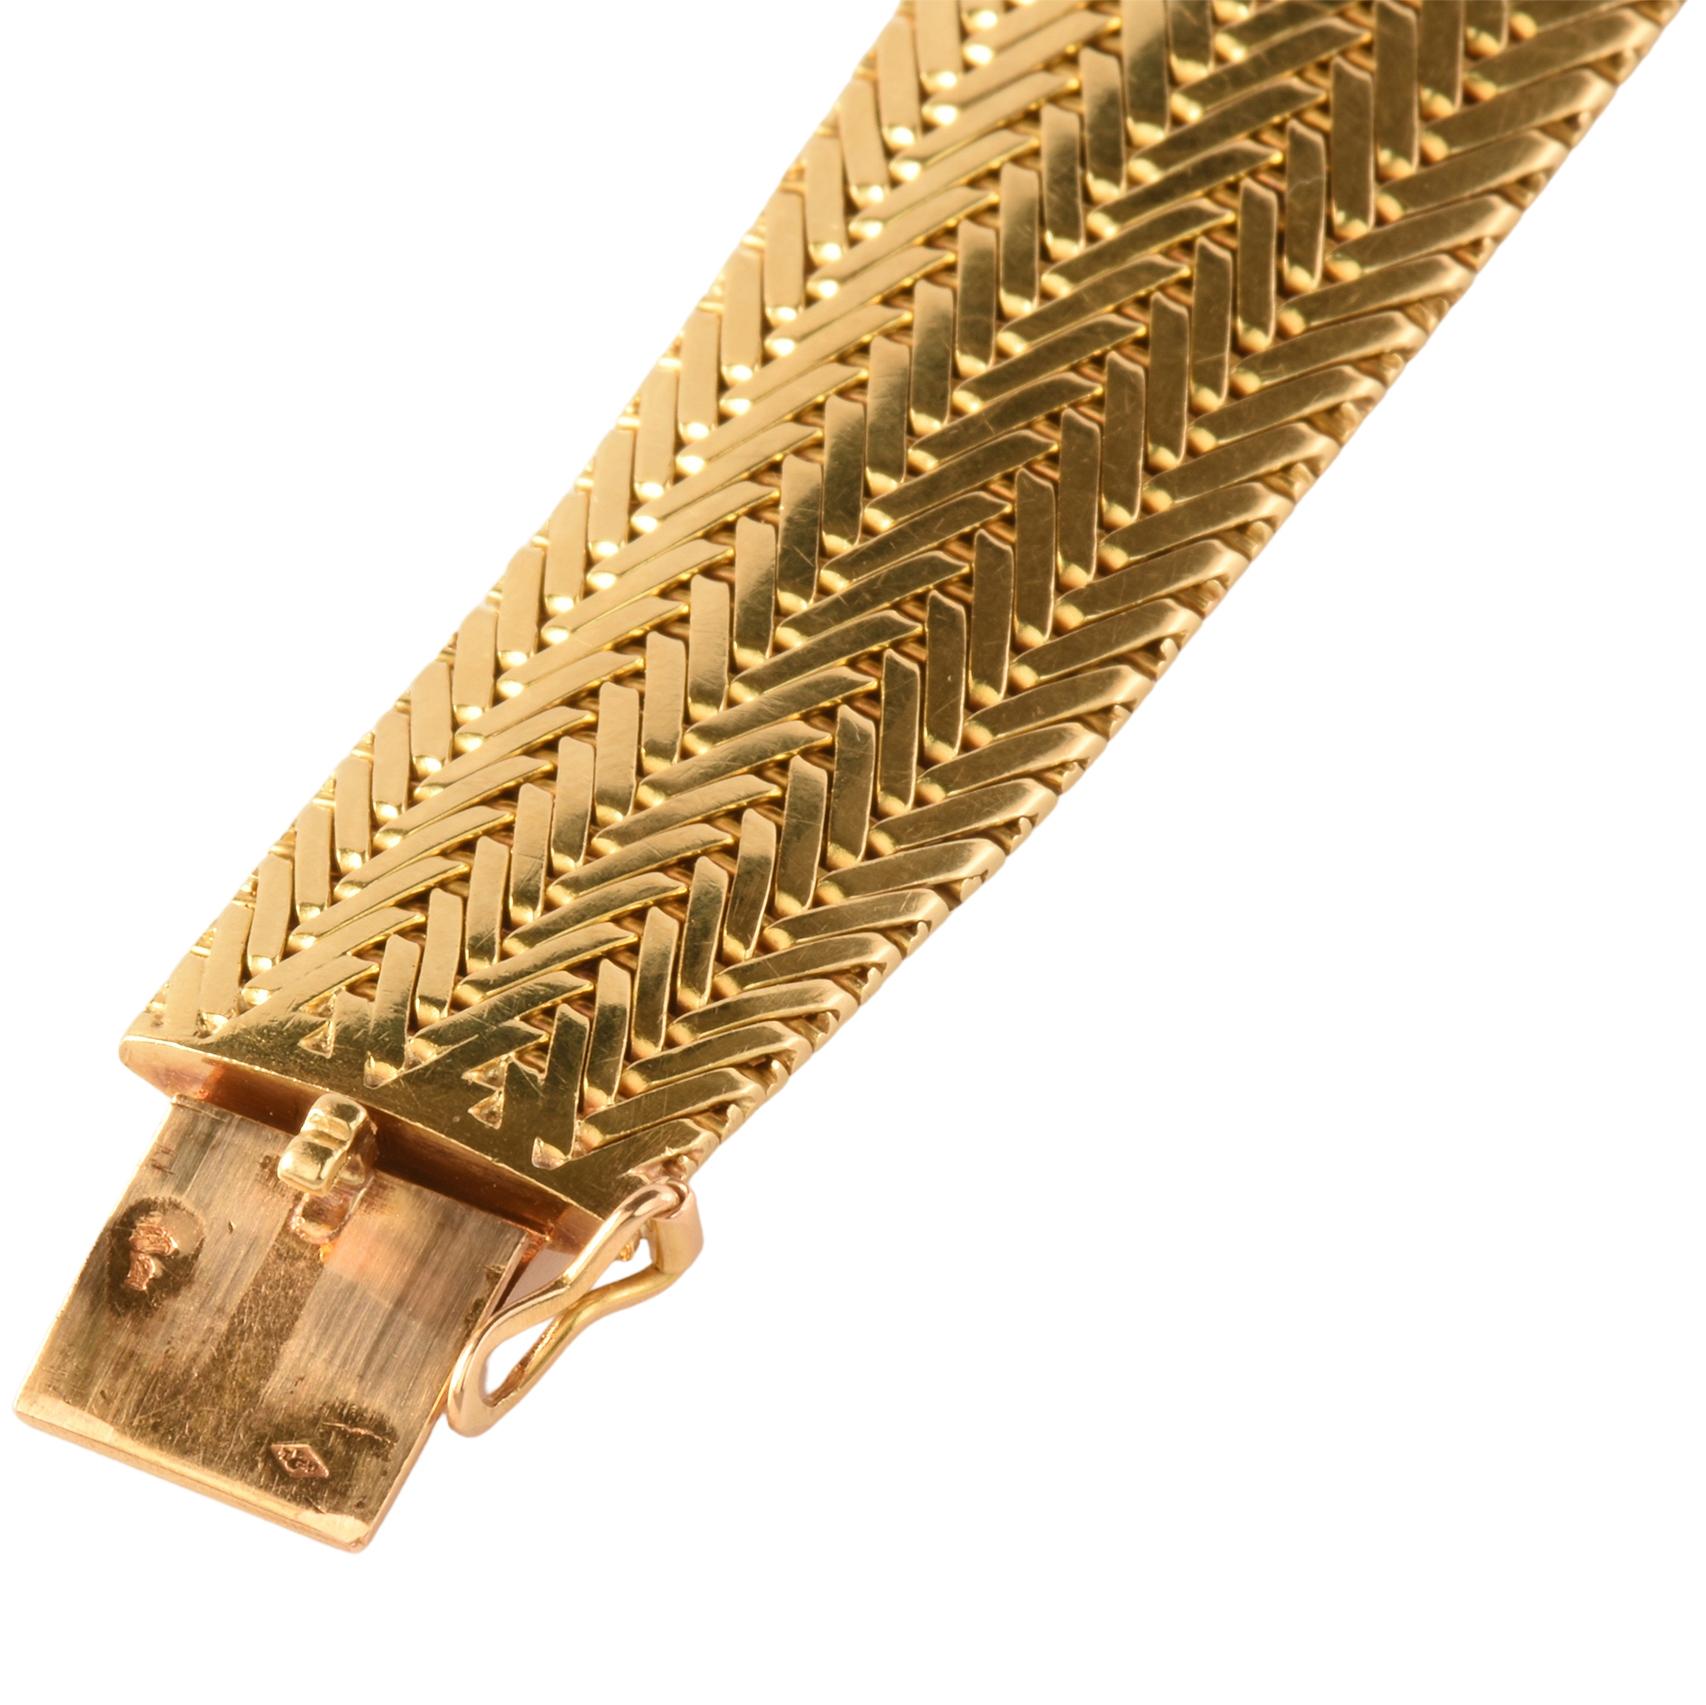 A fabulous stylish and sleek vintage bracelet by George L'Enfant. Crafted from 18k woven yellow gold if tapered form. Has 18ct double struck eagle heads (french) & George L'Enfant makers marks on the bracelet. Supplied with Cartier box.